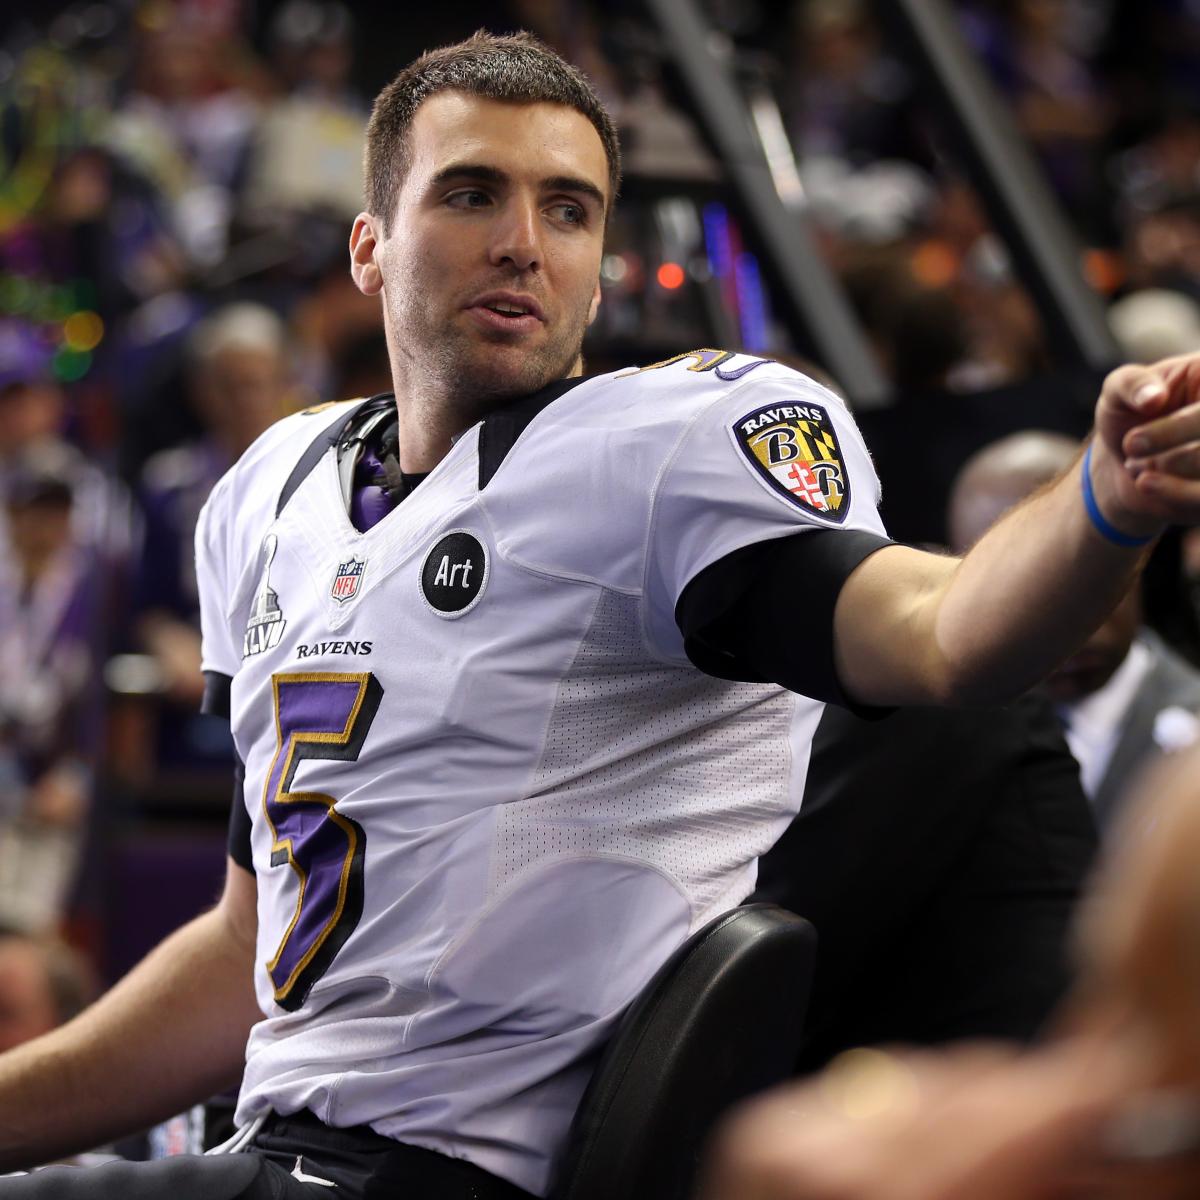 Super Bowl: CBS May Have to Pay Fine for Joe Flacco's 